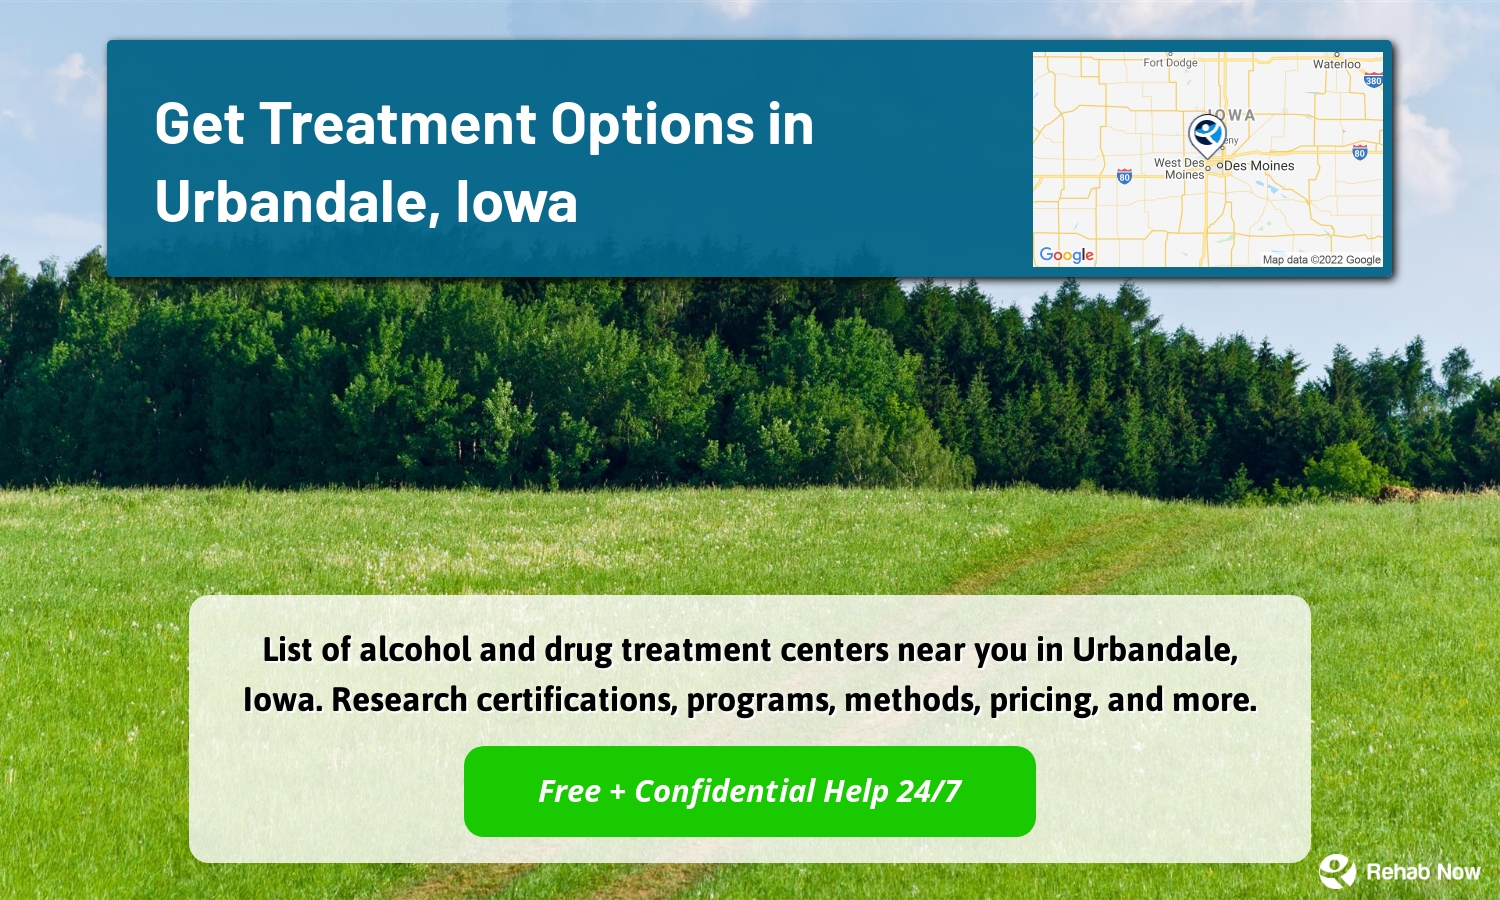 List of alcohol and drug treatment centers near you in Urbandale, Iowa. Research certifications, programs, methods, pricing, and more.